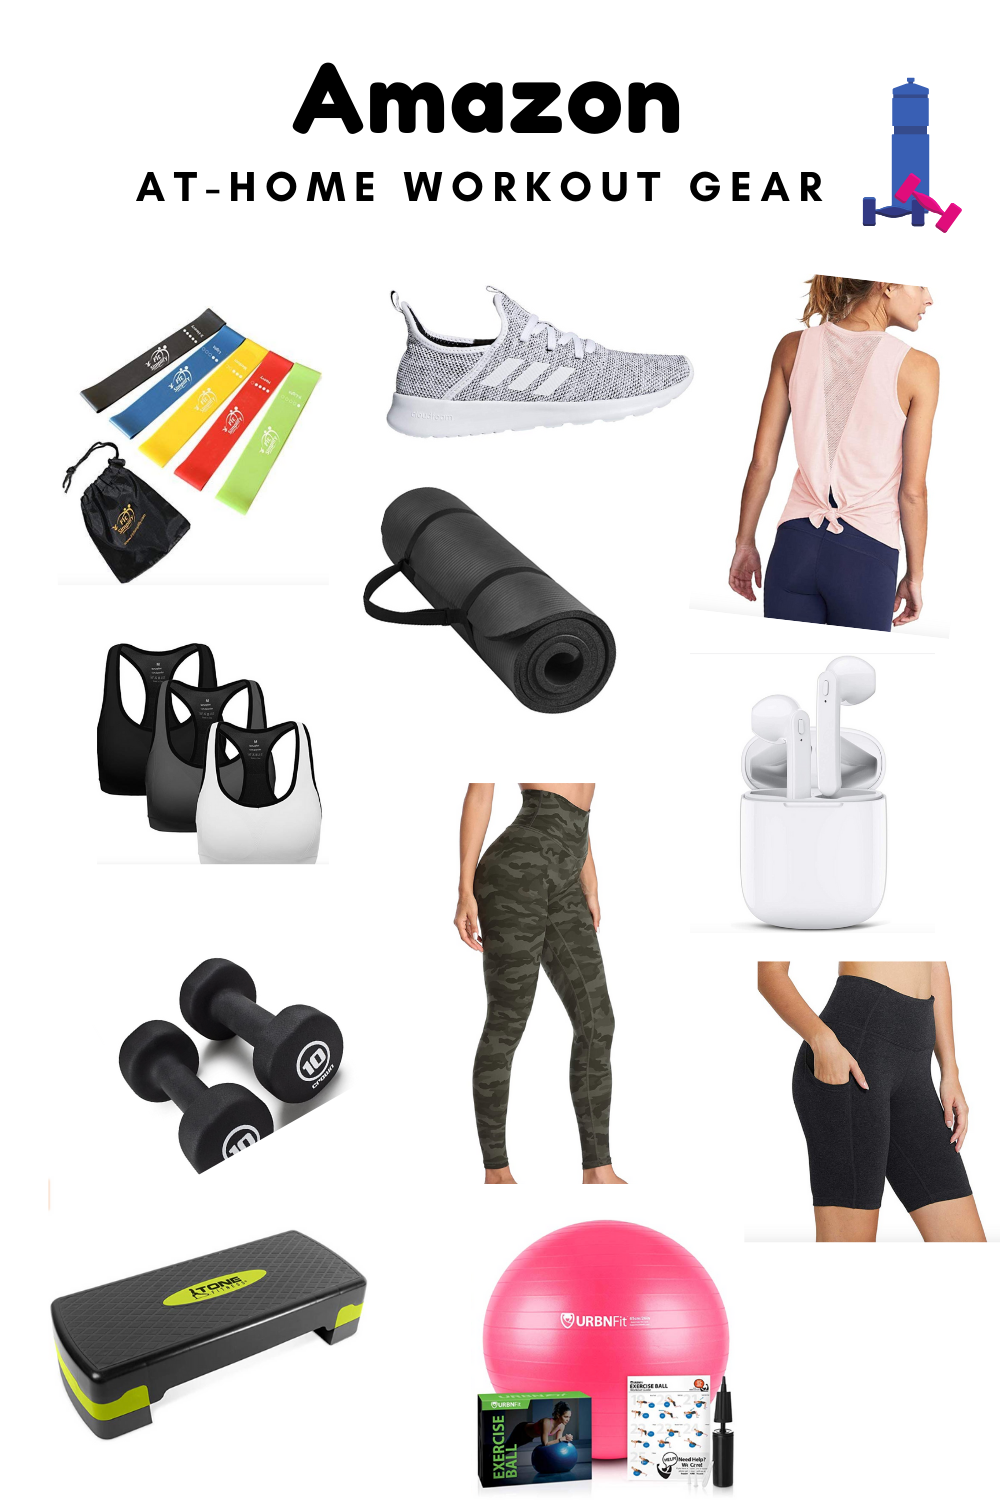 Amazon At-Home Workout Gear